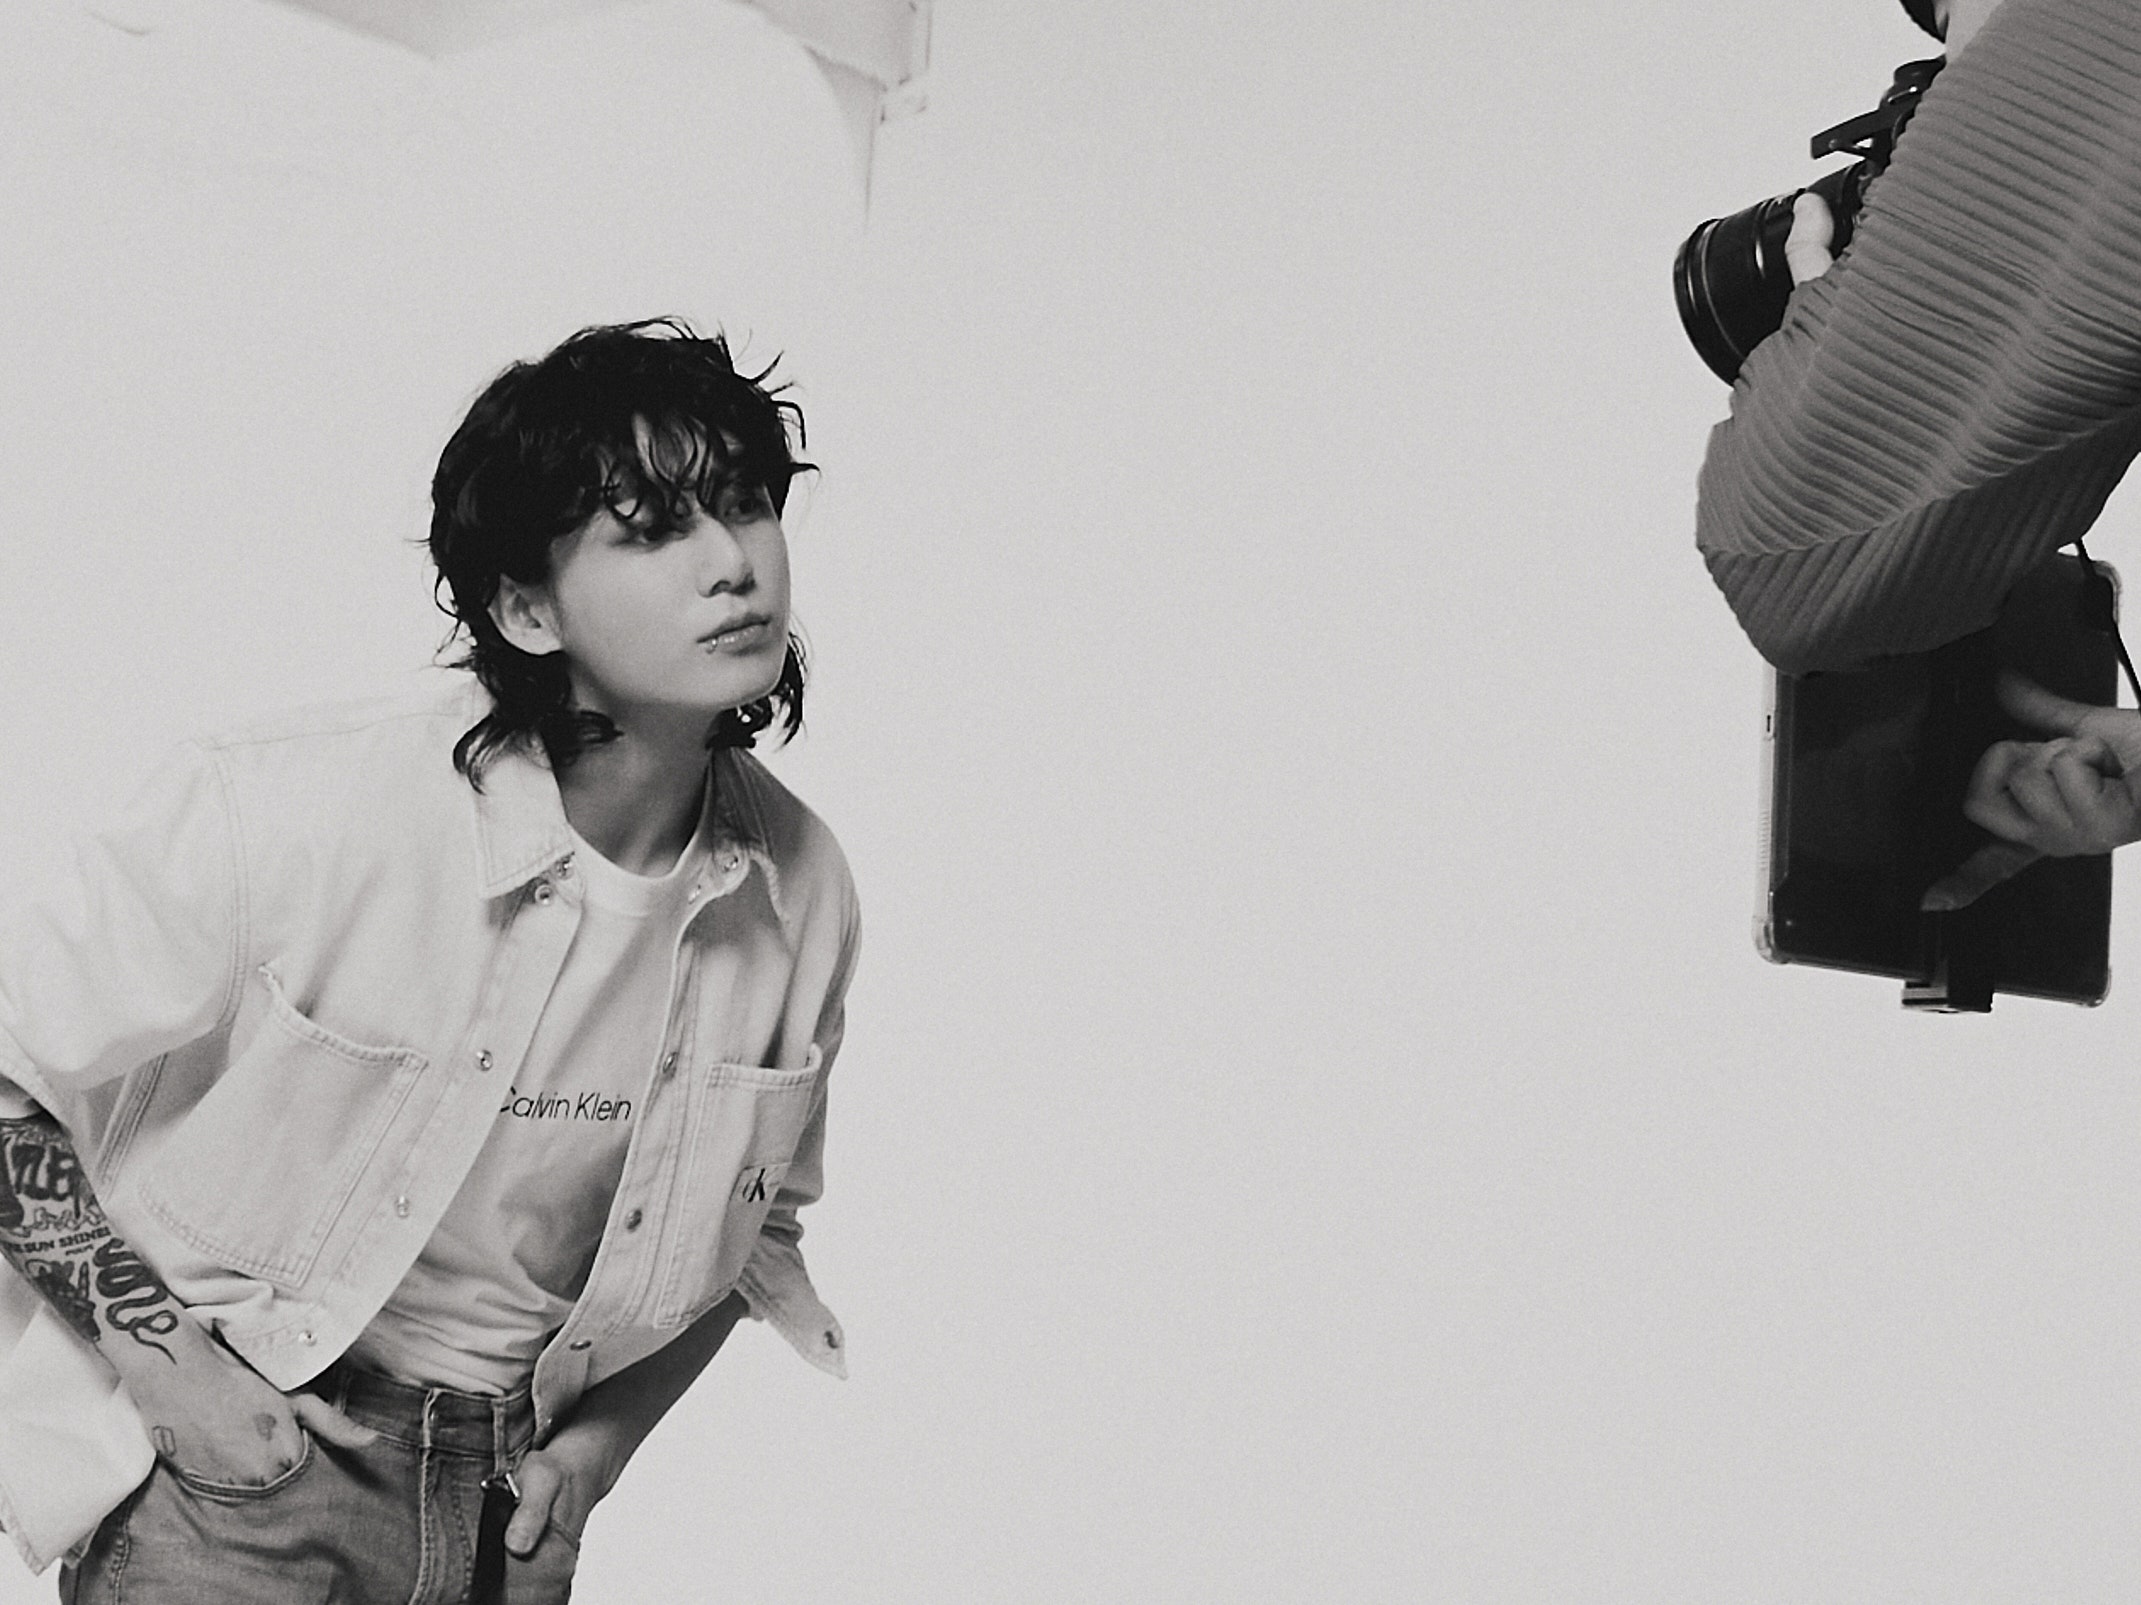 BTS's Jungkook's Calvin Klein Campaign: See 3 Exclusive Behind The Scenes Photo From The Shoot